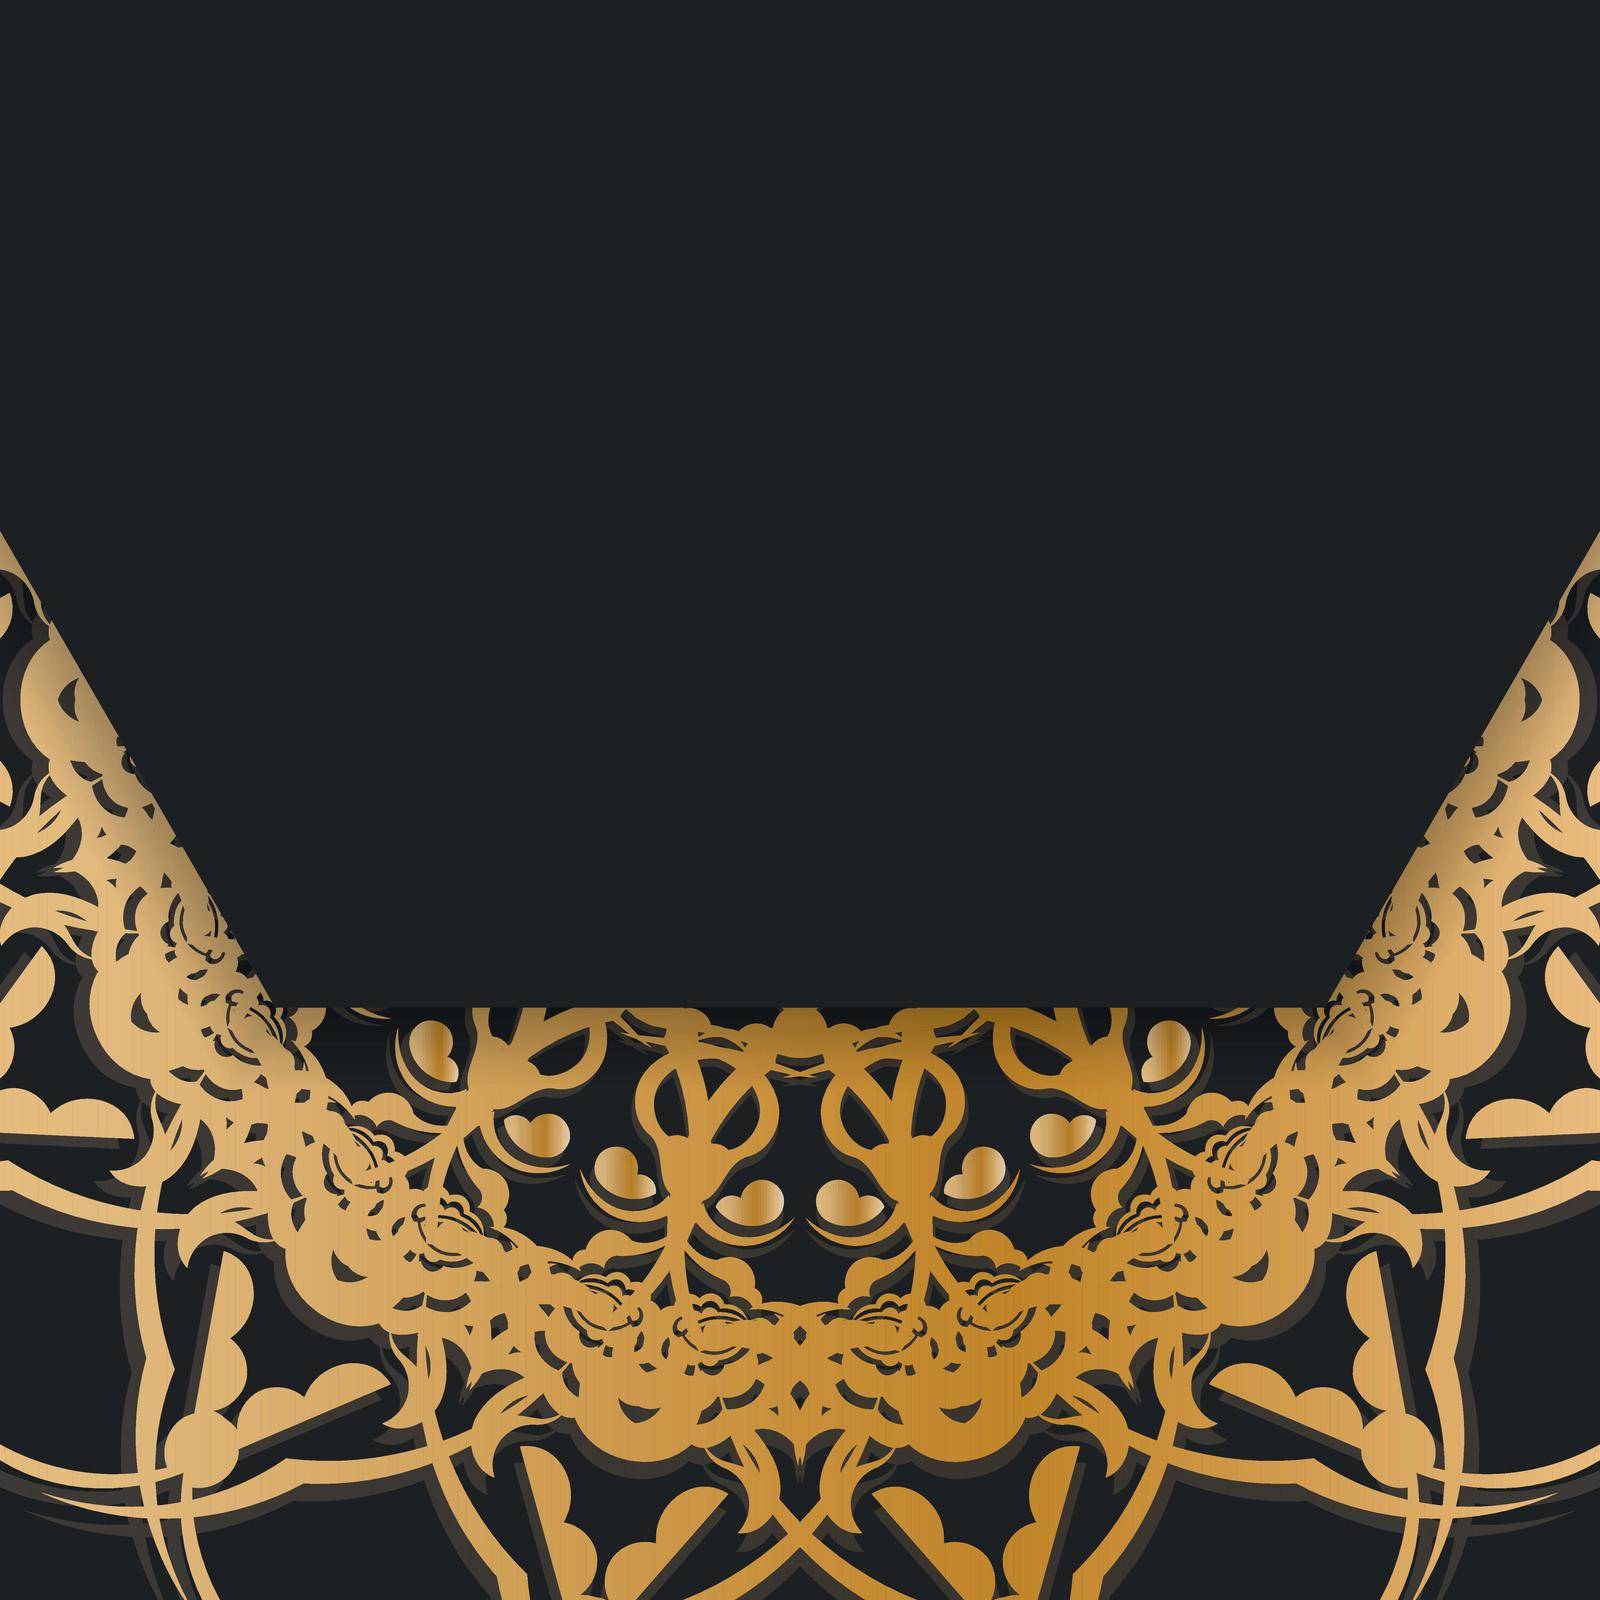 Leaflet in black with vintage gold ornamentation is ready for print.